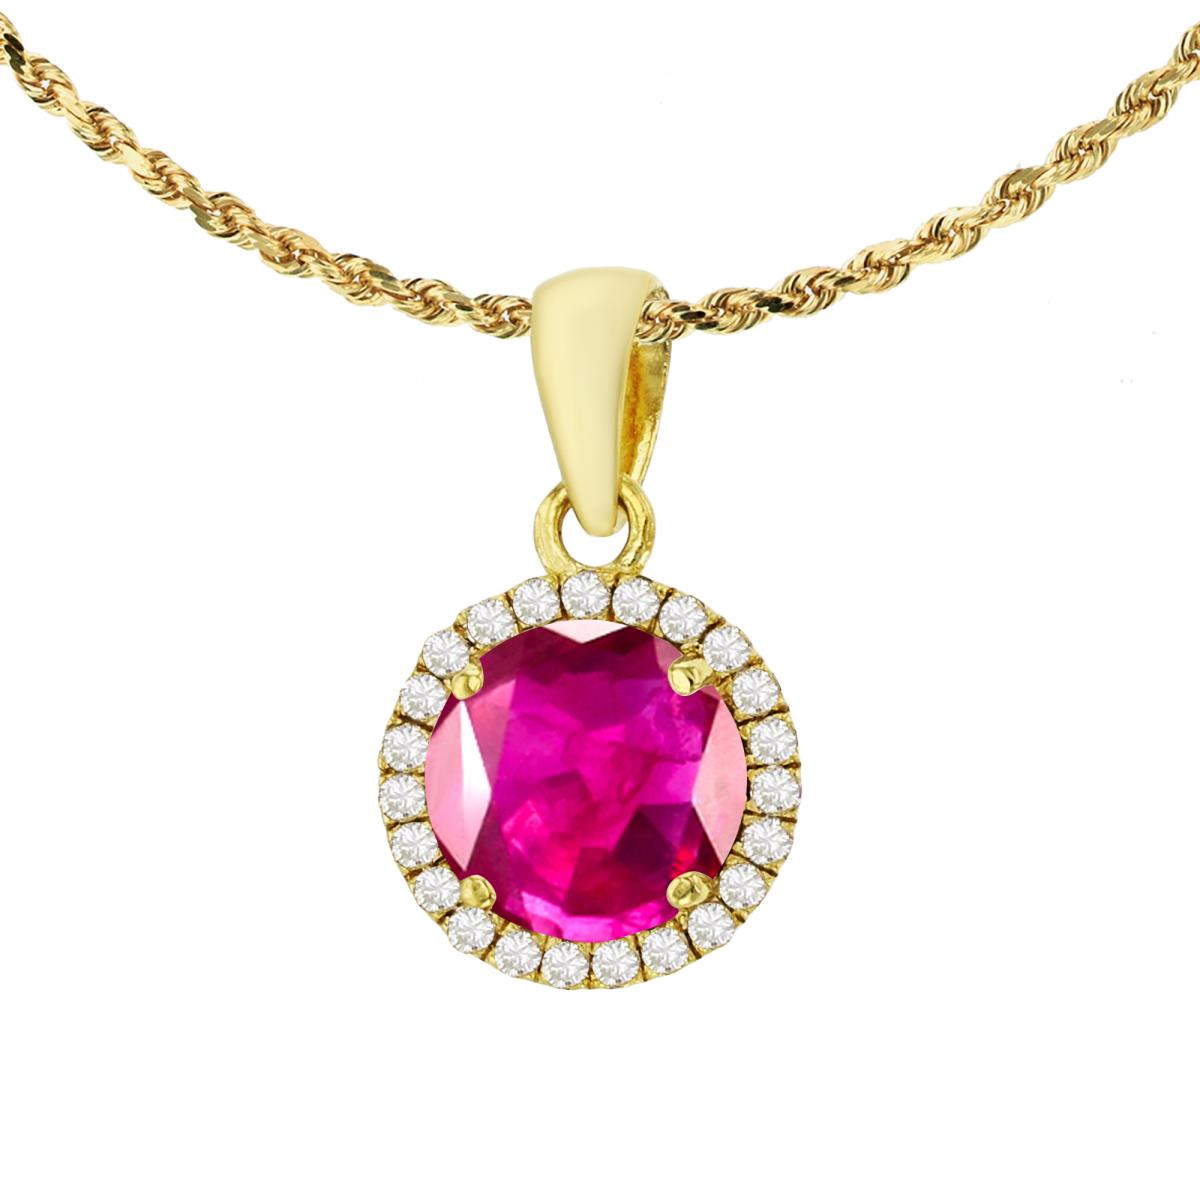 10K Yellow Gold 7mm Round Glass Filled Ruby & 0.12 CTTW Diamond Halo 18" Rope Chain Necklace